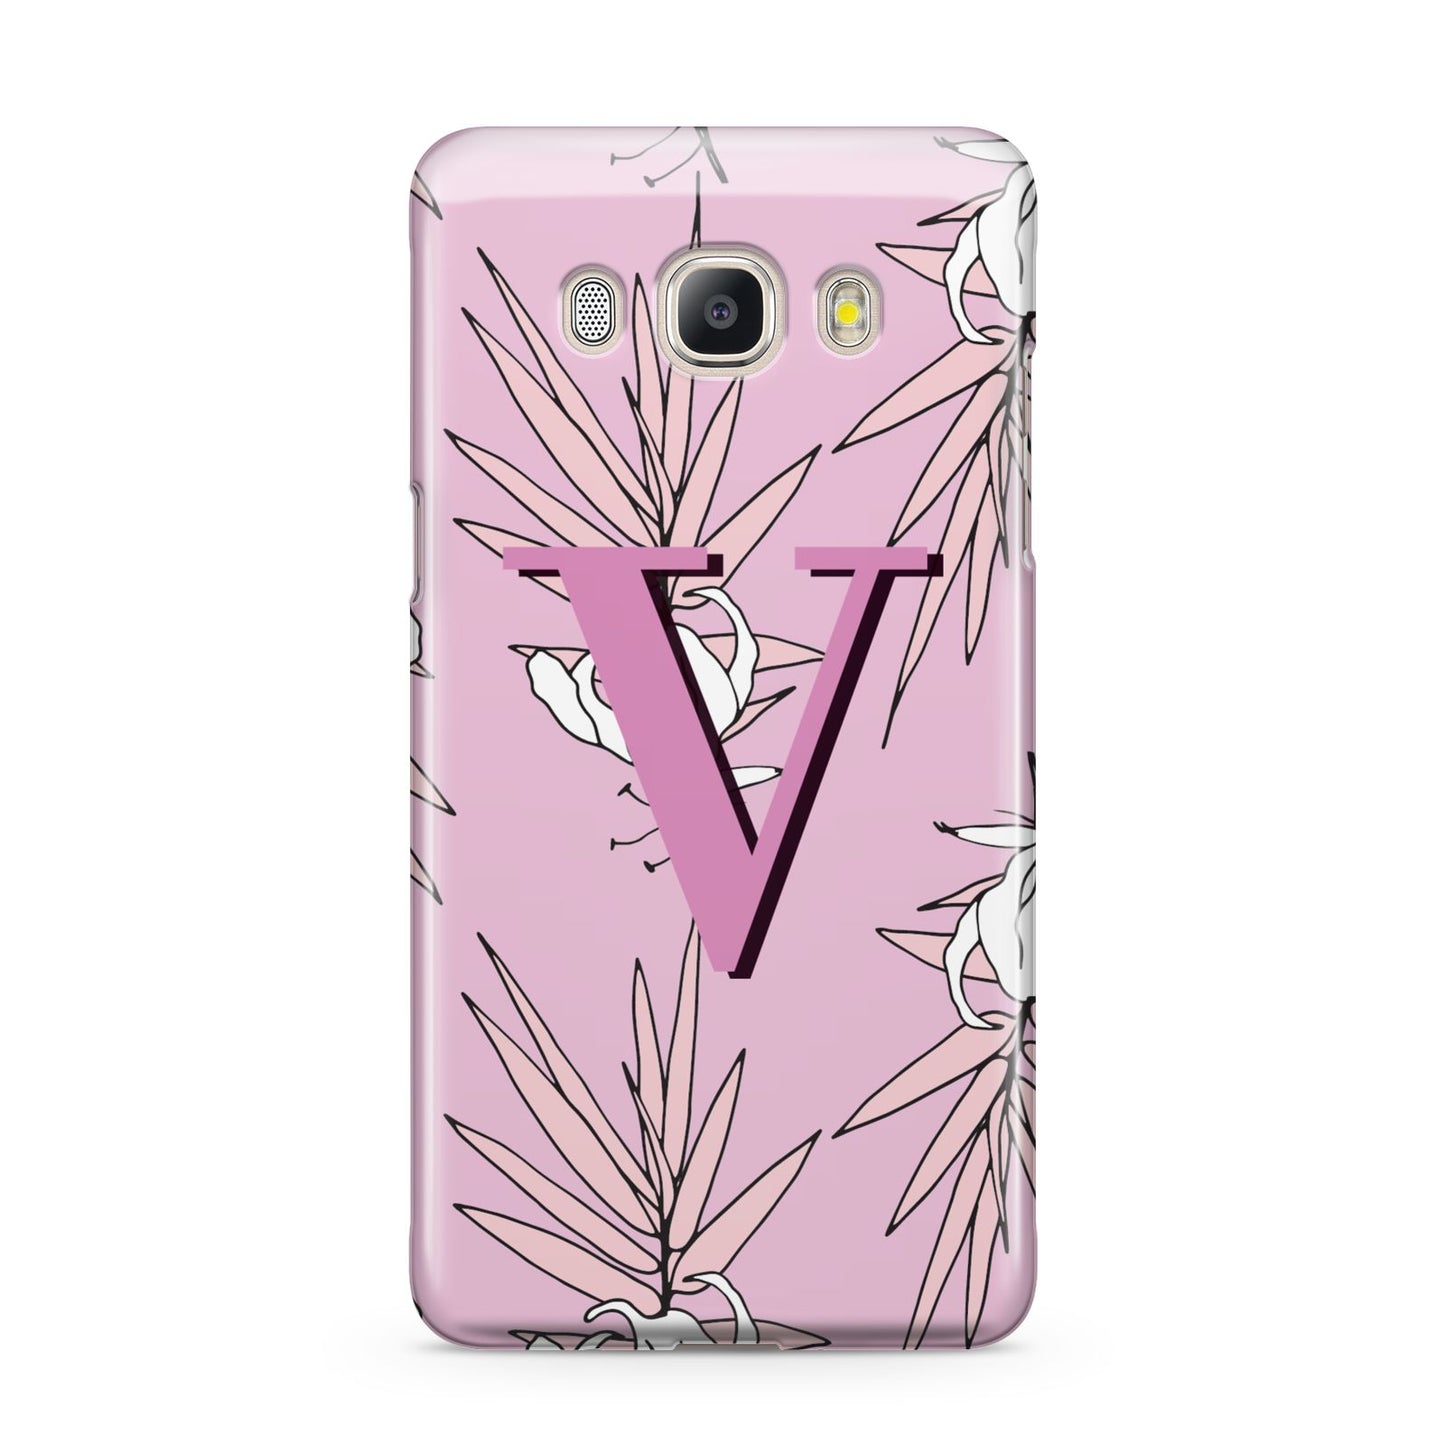 Personalised Pink and White Floral Monogram Samsung Galaxy J5 2016 Case